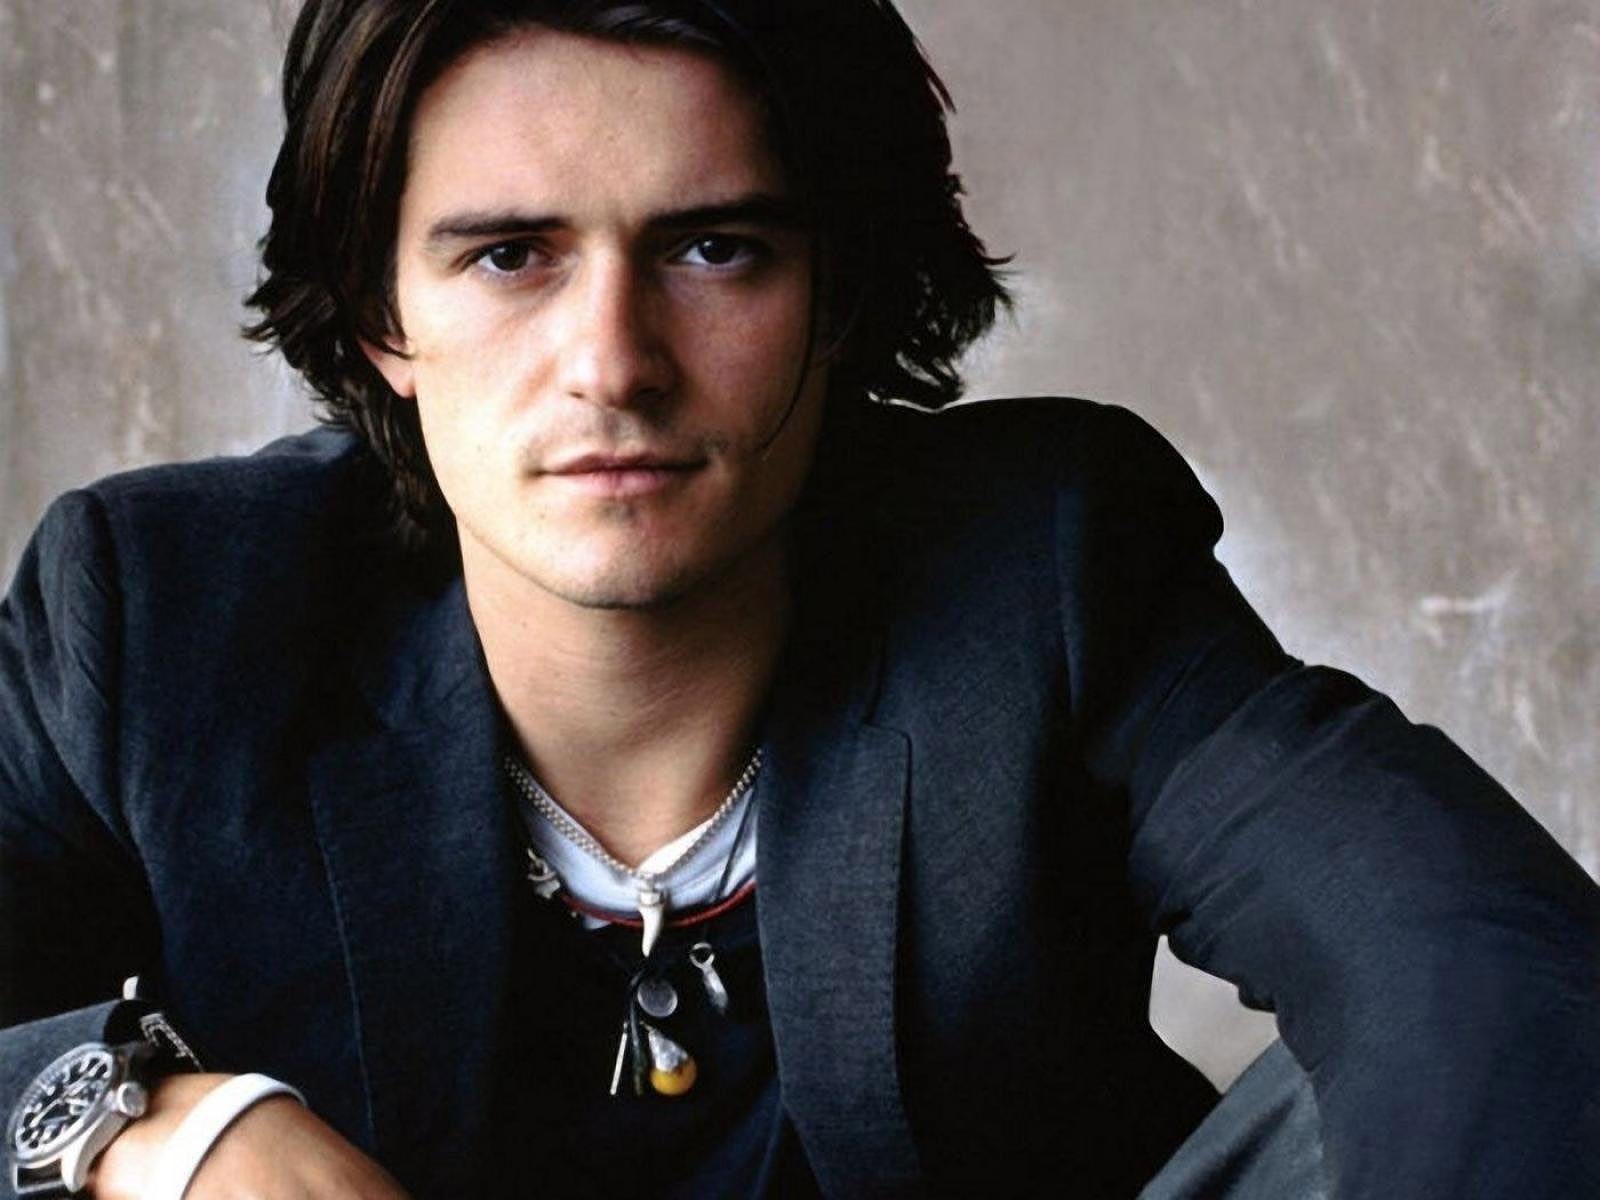 Orlando Bloom Wallpaper High Resolution and Quality Download